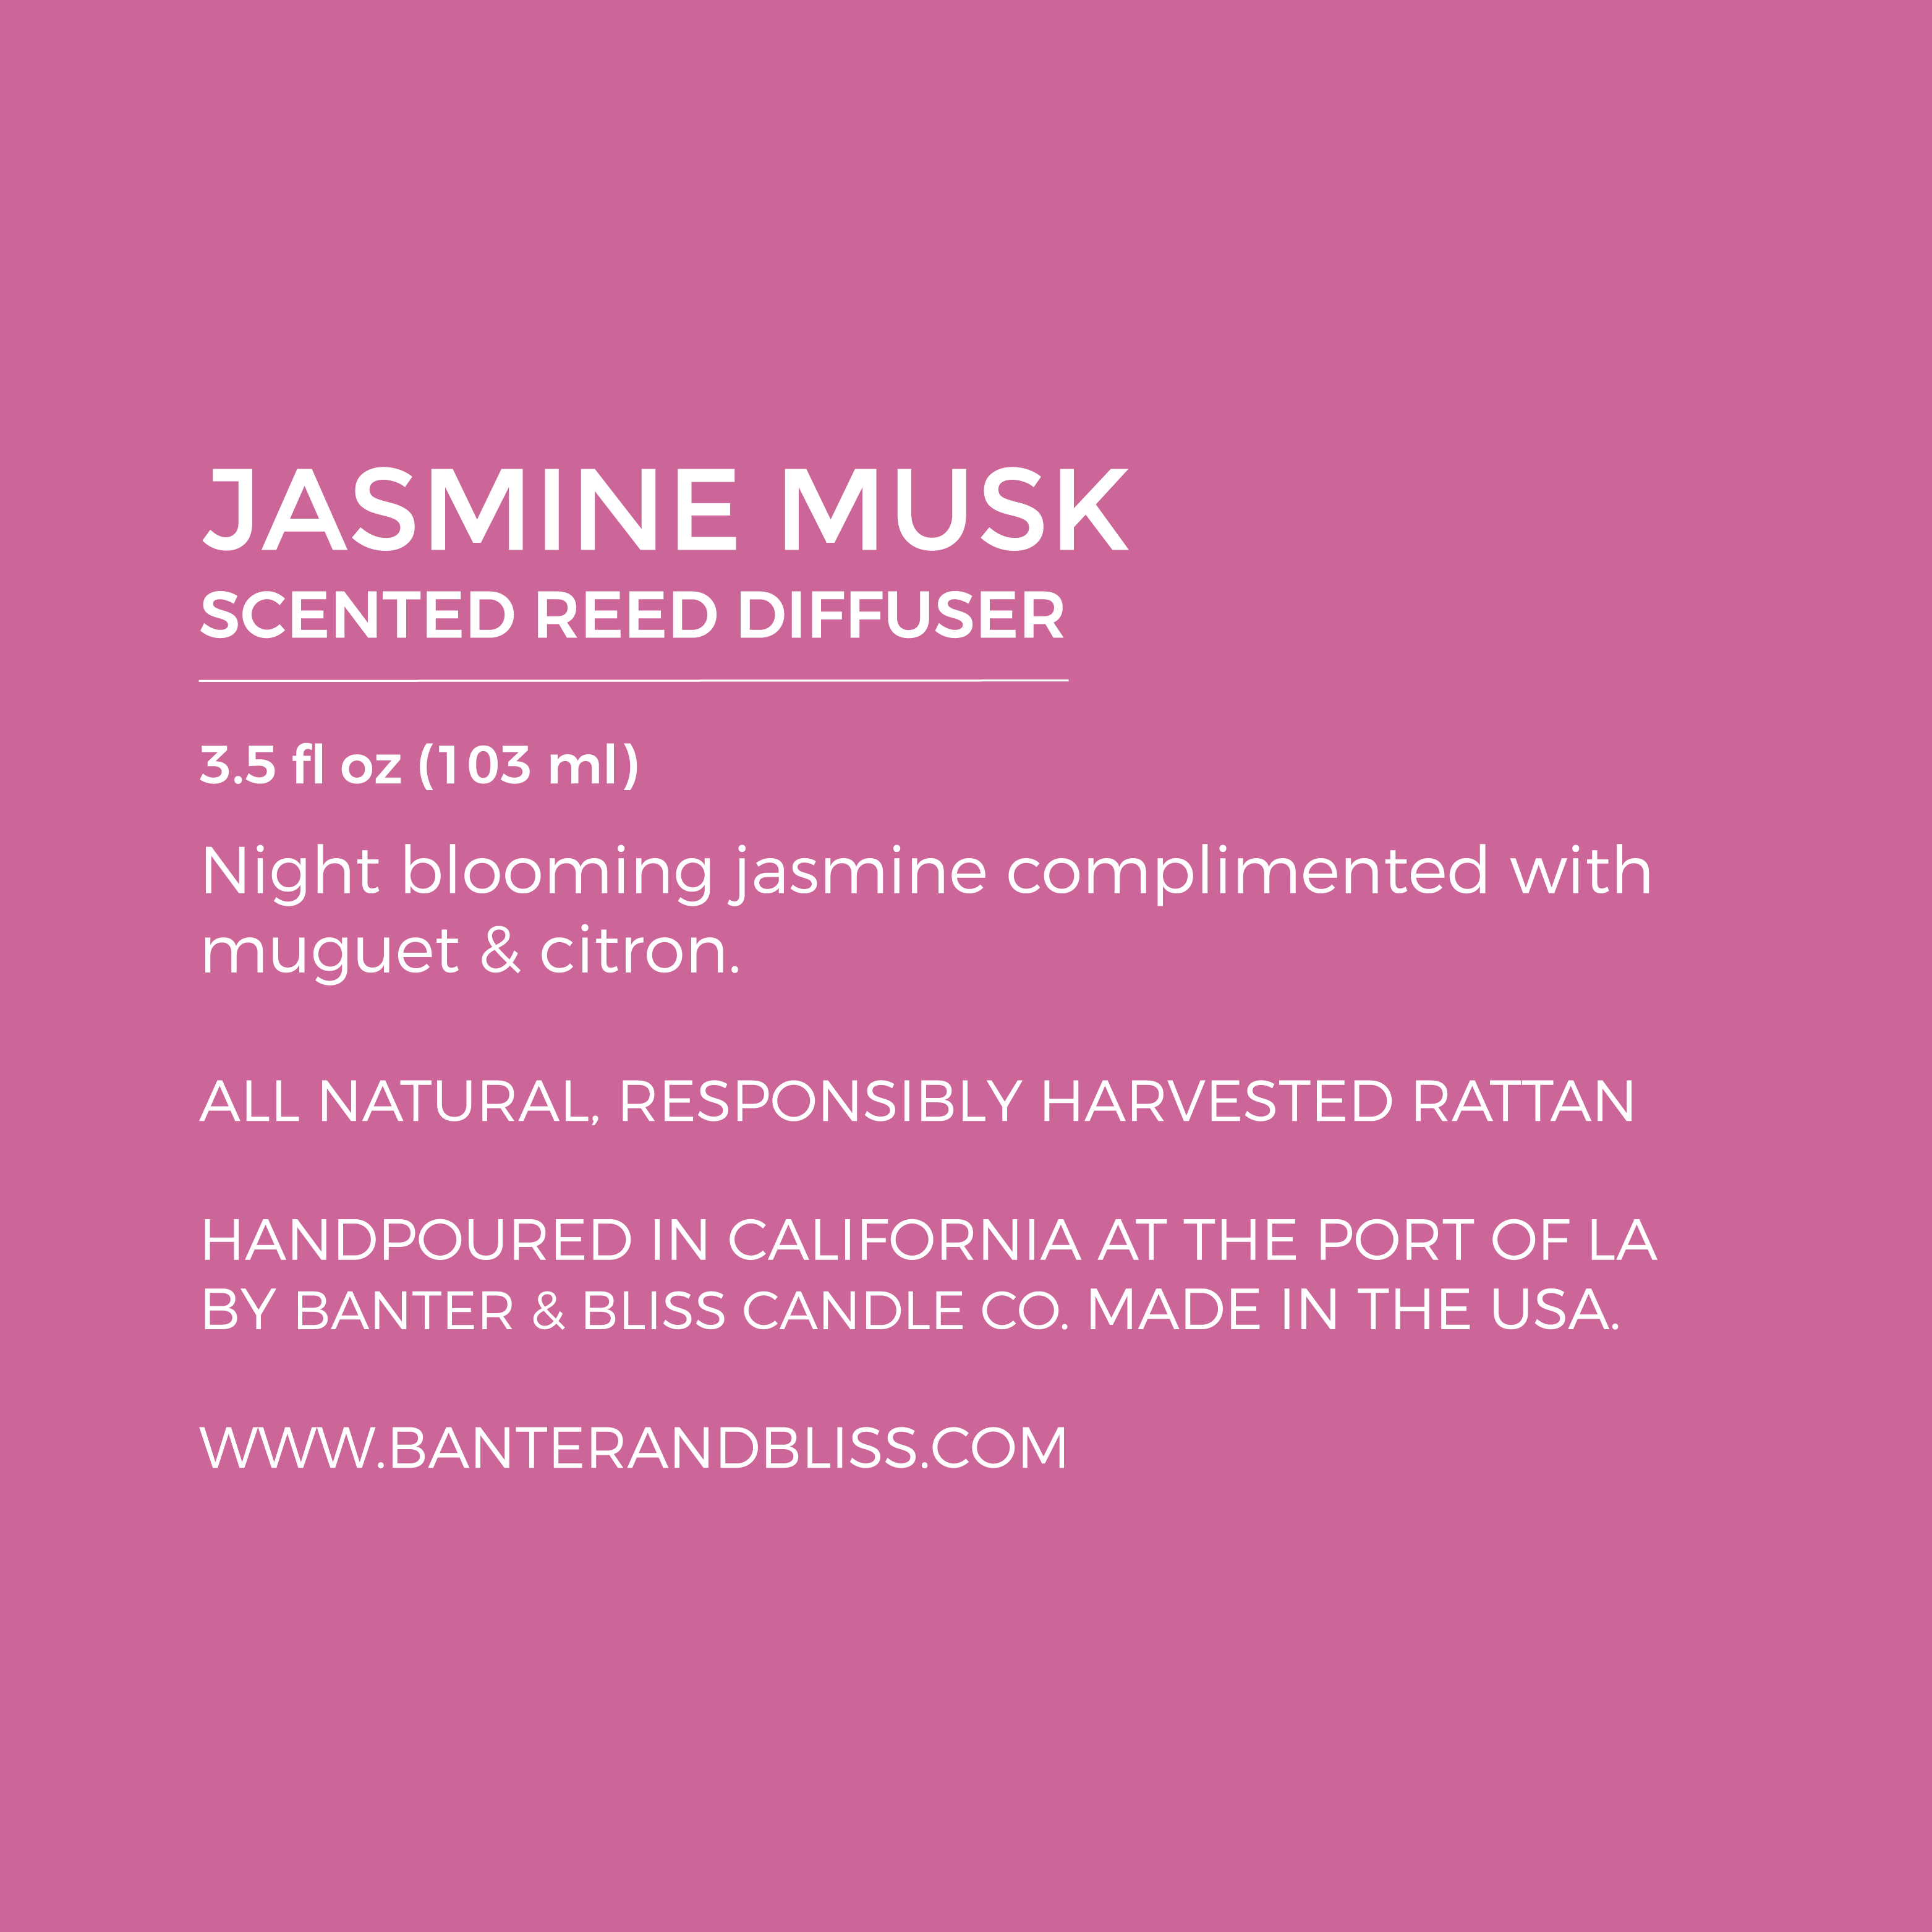 Jasmine Musk. Scented Reed Diffuser.